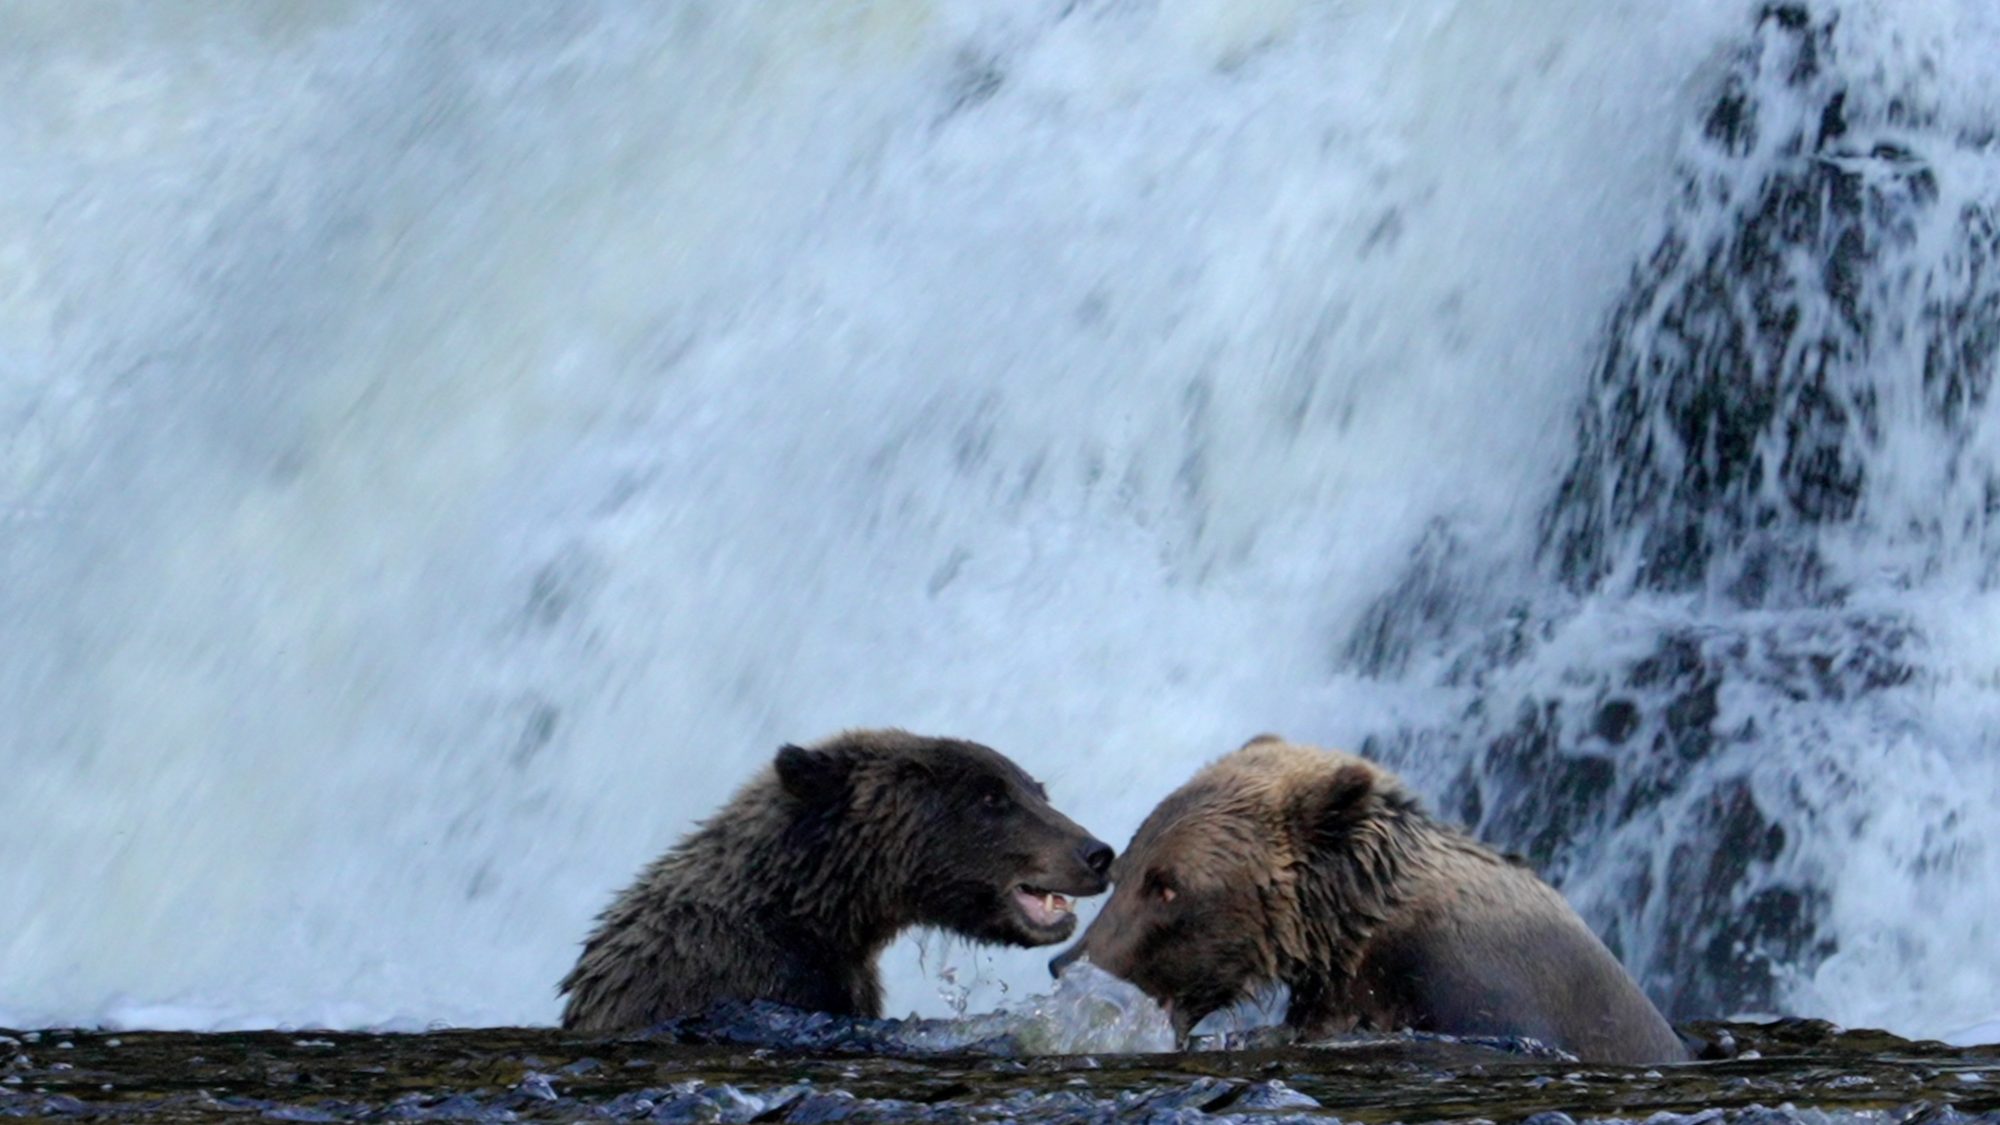 Grizzly Bears sparring at the waterfall – Alaska 2023